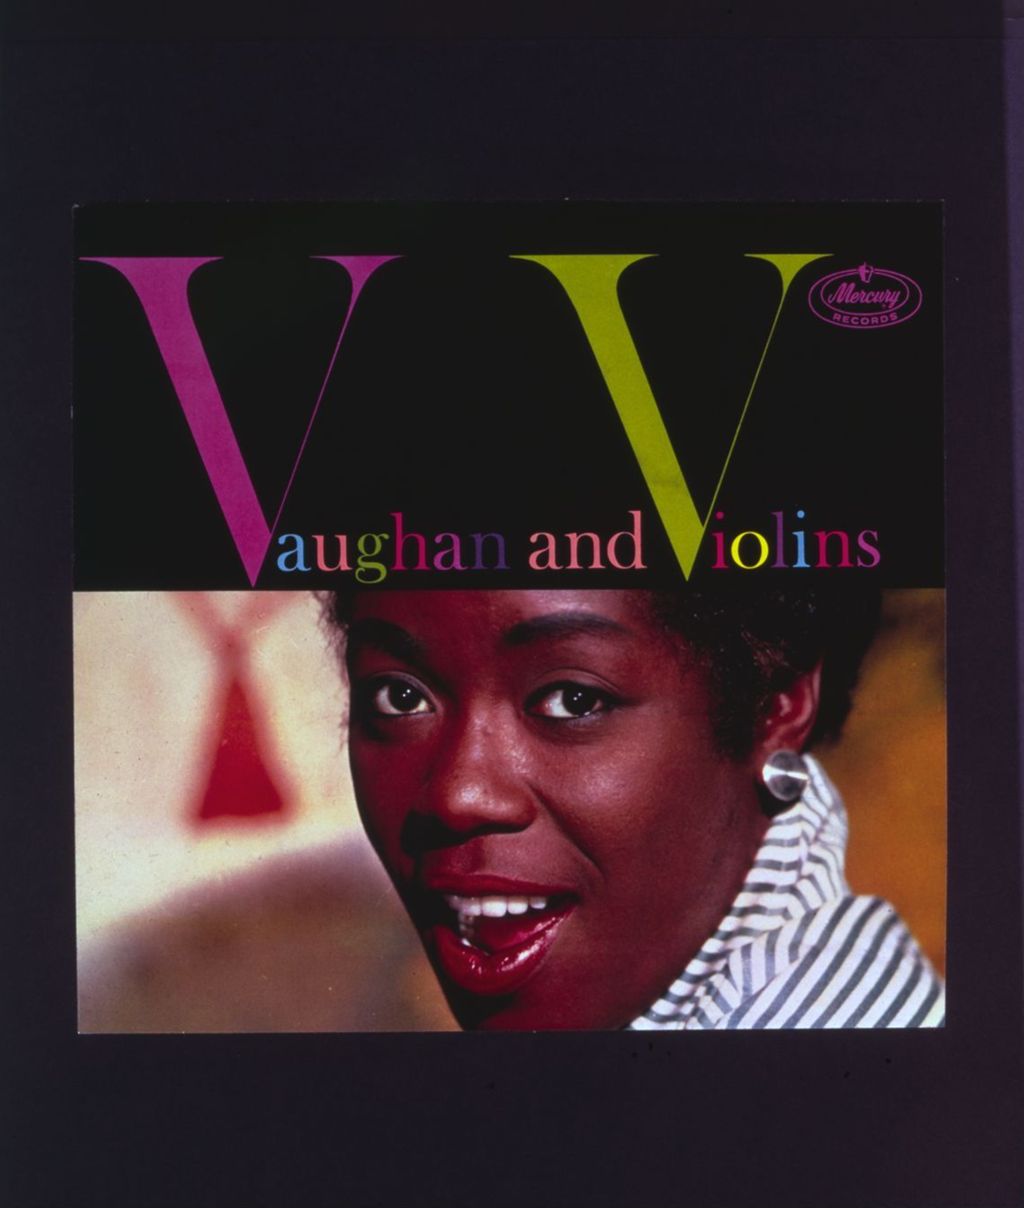 Miniature of Vaughan and Violins, album cover